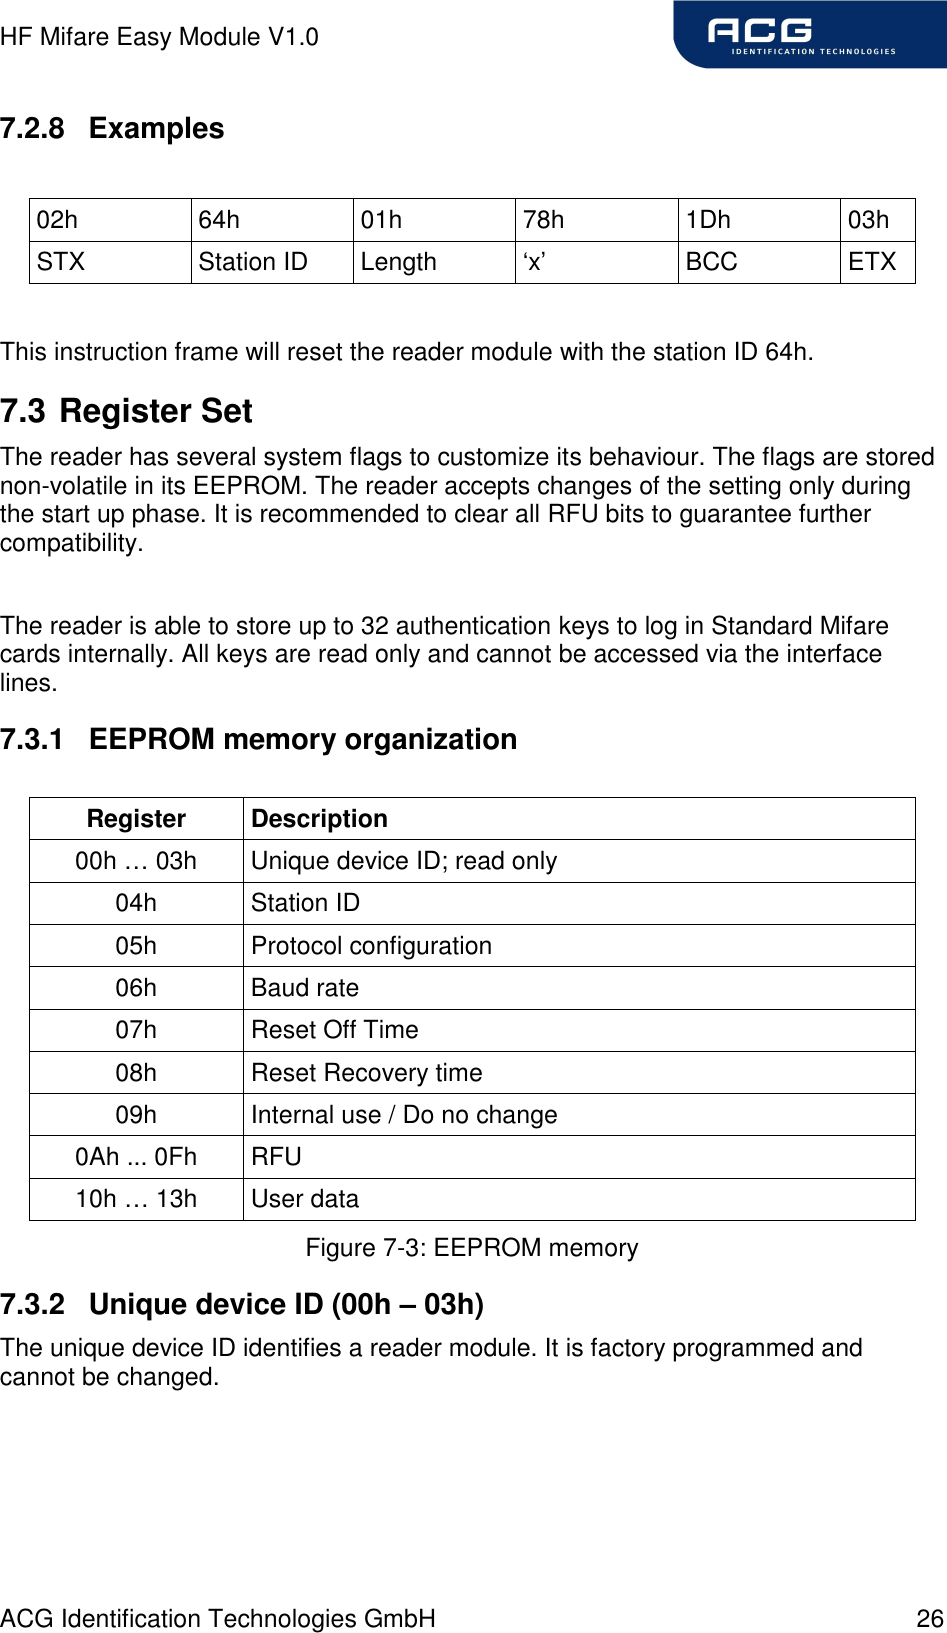 HF Mifare Easy Module V1.0 ACG Identification Technologies GmbH  26 7.2.8  Examples  02h  64h  01h  78h  1Dh  03h STX  Station ID  Length  ‘x’  BCC  ETX  This instruction frame will reset the reader module with the station ID 64h. 7.3 Register Set The reader has several system flags to customize its behaviour. The flags are stored non-volatile in its EEPROM. The reader accepts changes of the setting only during the start up phase. It is recommended to clear all RFU bits to guarantee further compatibility.  The reader is able to store up to 32 authentication keys to log in Standard Mifare cards internally. All keys are read only and cannot be accessed via the interface lines. 7.3.1  EEPROM memory organization  Register Description 00h … 03h  Unique device ID; read only 04h  Station ID 05h  Protocol configuration 06h  Baud rate 07h  Reset Off Time 08h  Reset Recovery time 09h  Internal use / Do no change 0Ah ... 0Fh  RFU 10h … 13h  User data Figure 7-3: EEPROM memory 7.3.2  Unique device ID (00h – 03h) The unique device ID identifies a reader module. It is factory programmed and cannot be changed. 